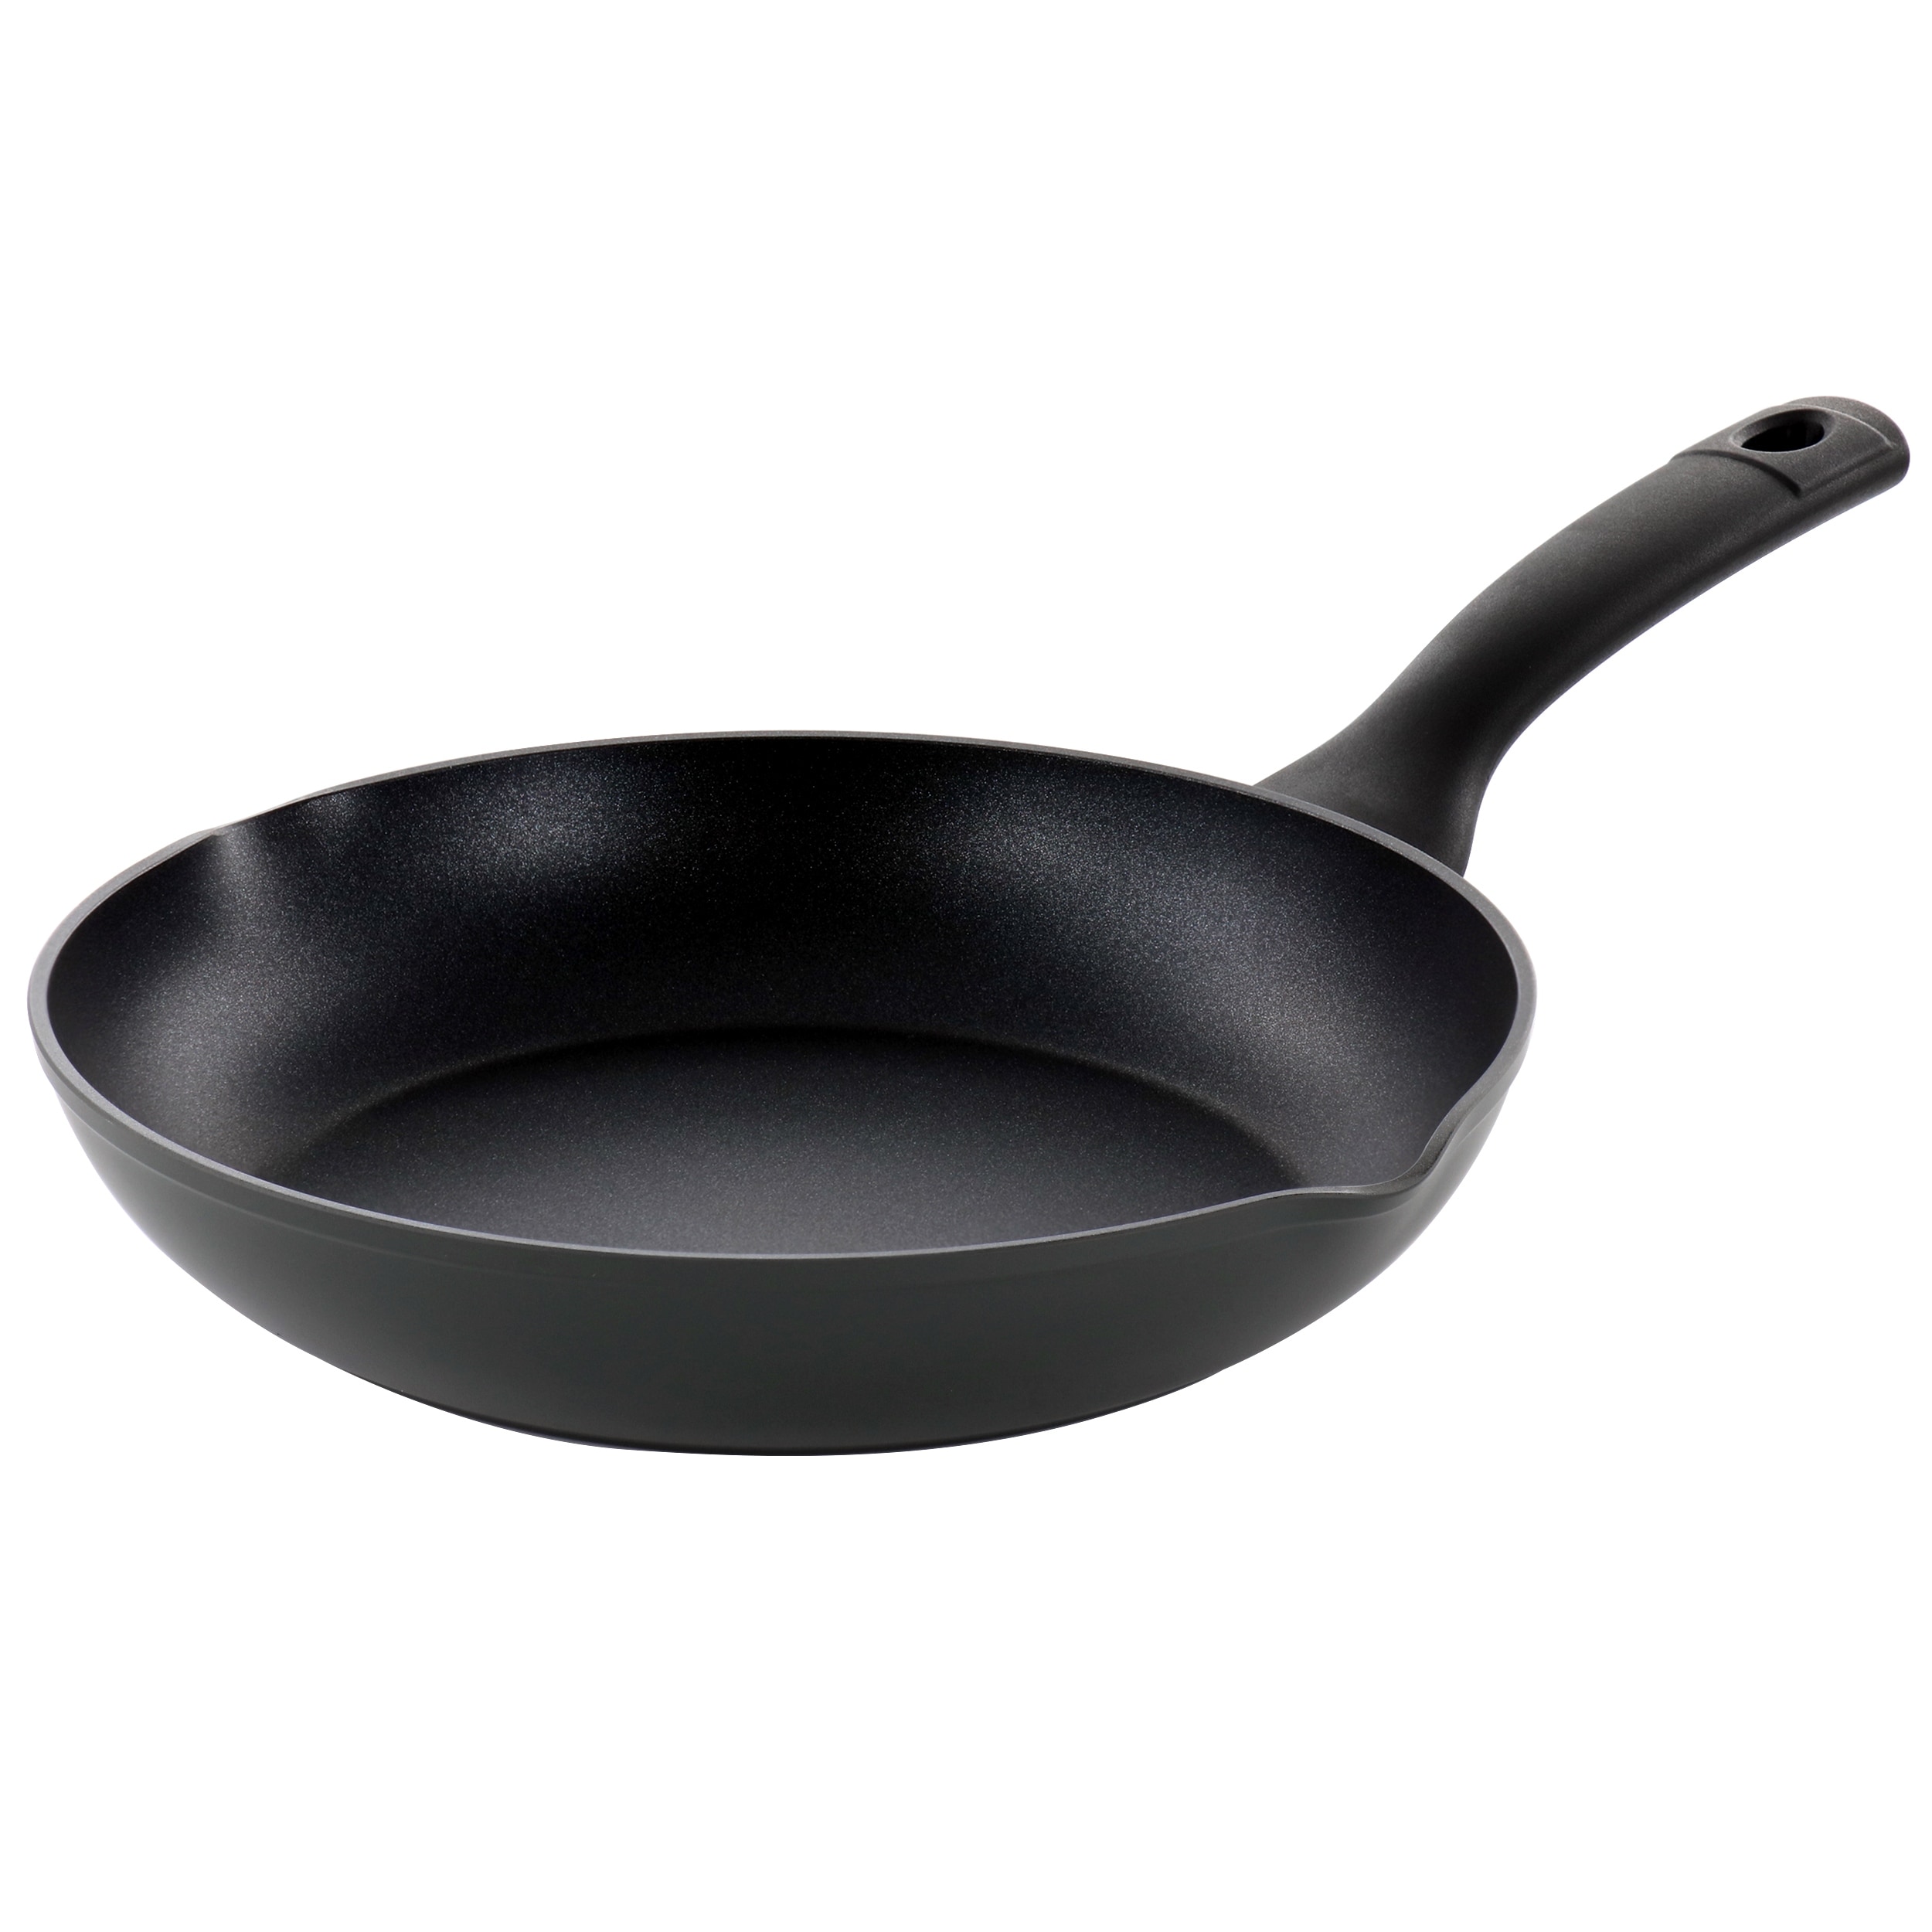 https://ak1.ostkcdn.com/images/products/is/images/direct/d90e0bbd7df9f85aae4463147ee45ef37815dd52/Oster-Kingsway-8-Inch-Aluminum-Nonstick-Frying-Pan-in-Black.jpg